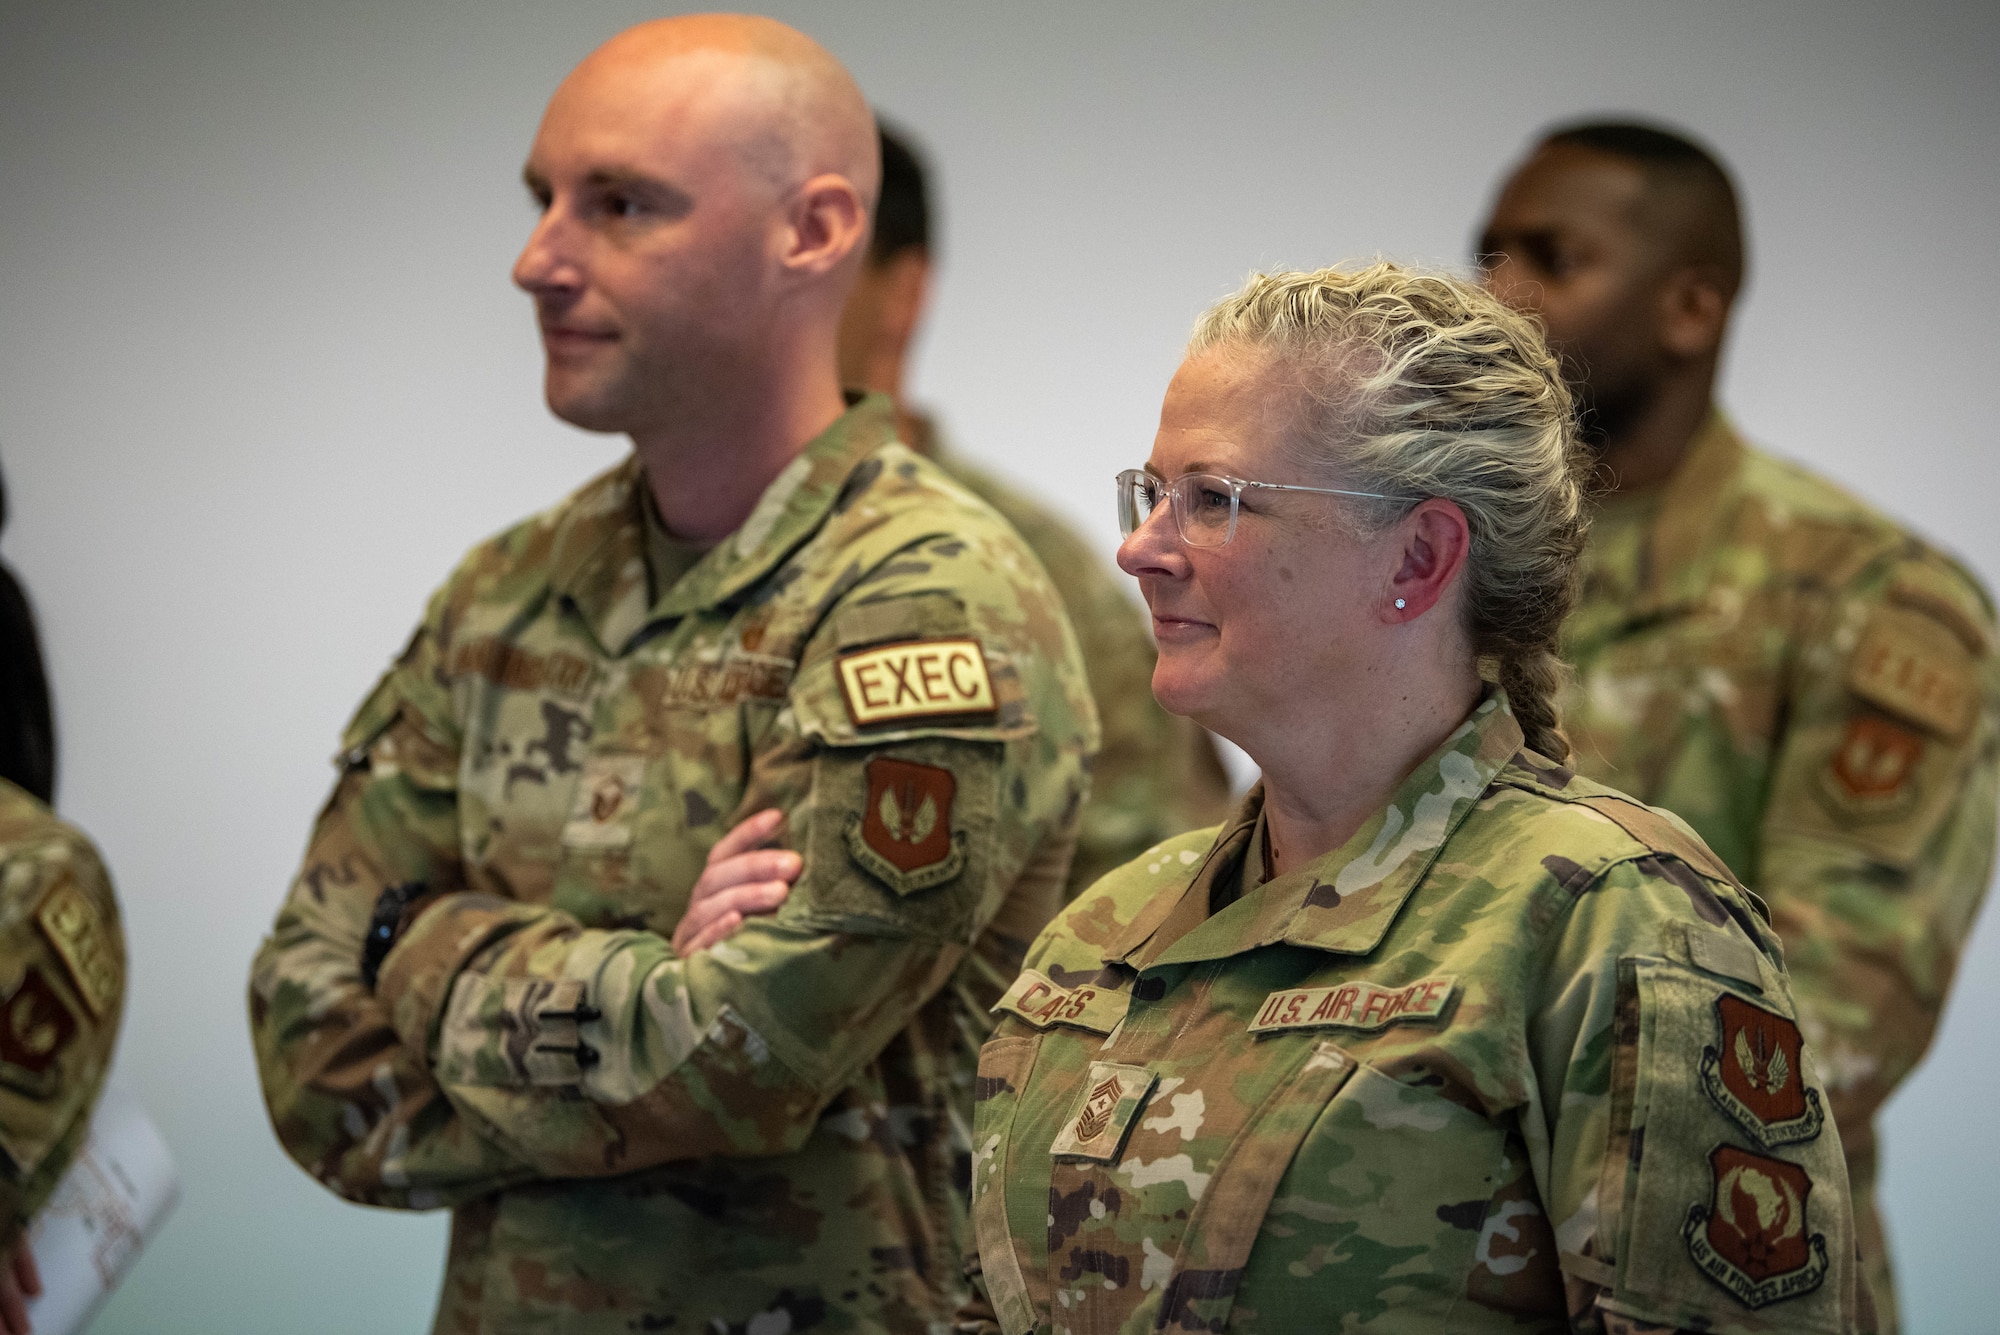 U.S. Air Force Chief Master Sgt. Stephanie Cates, Third Air Force command chief, visits Spangdahlem Air Base, Germany.